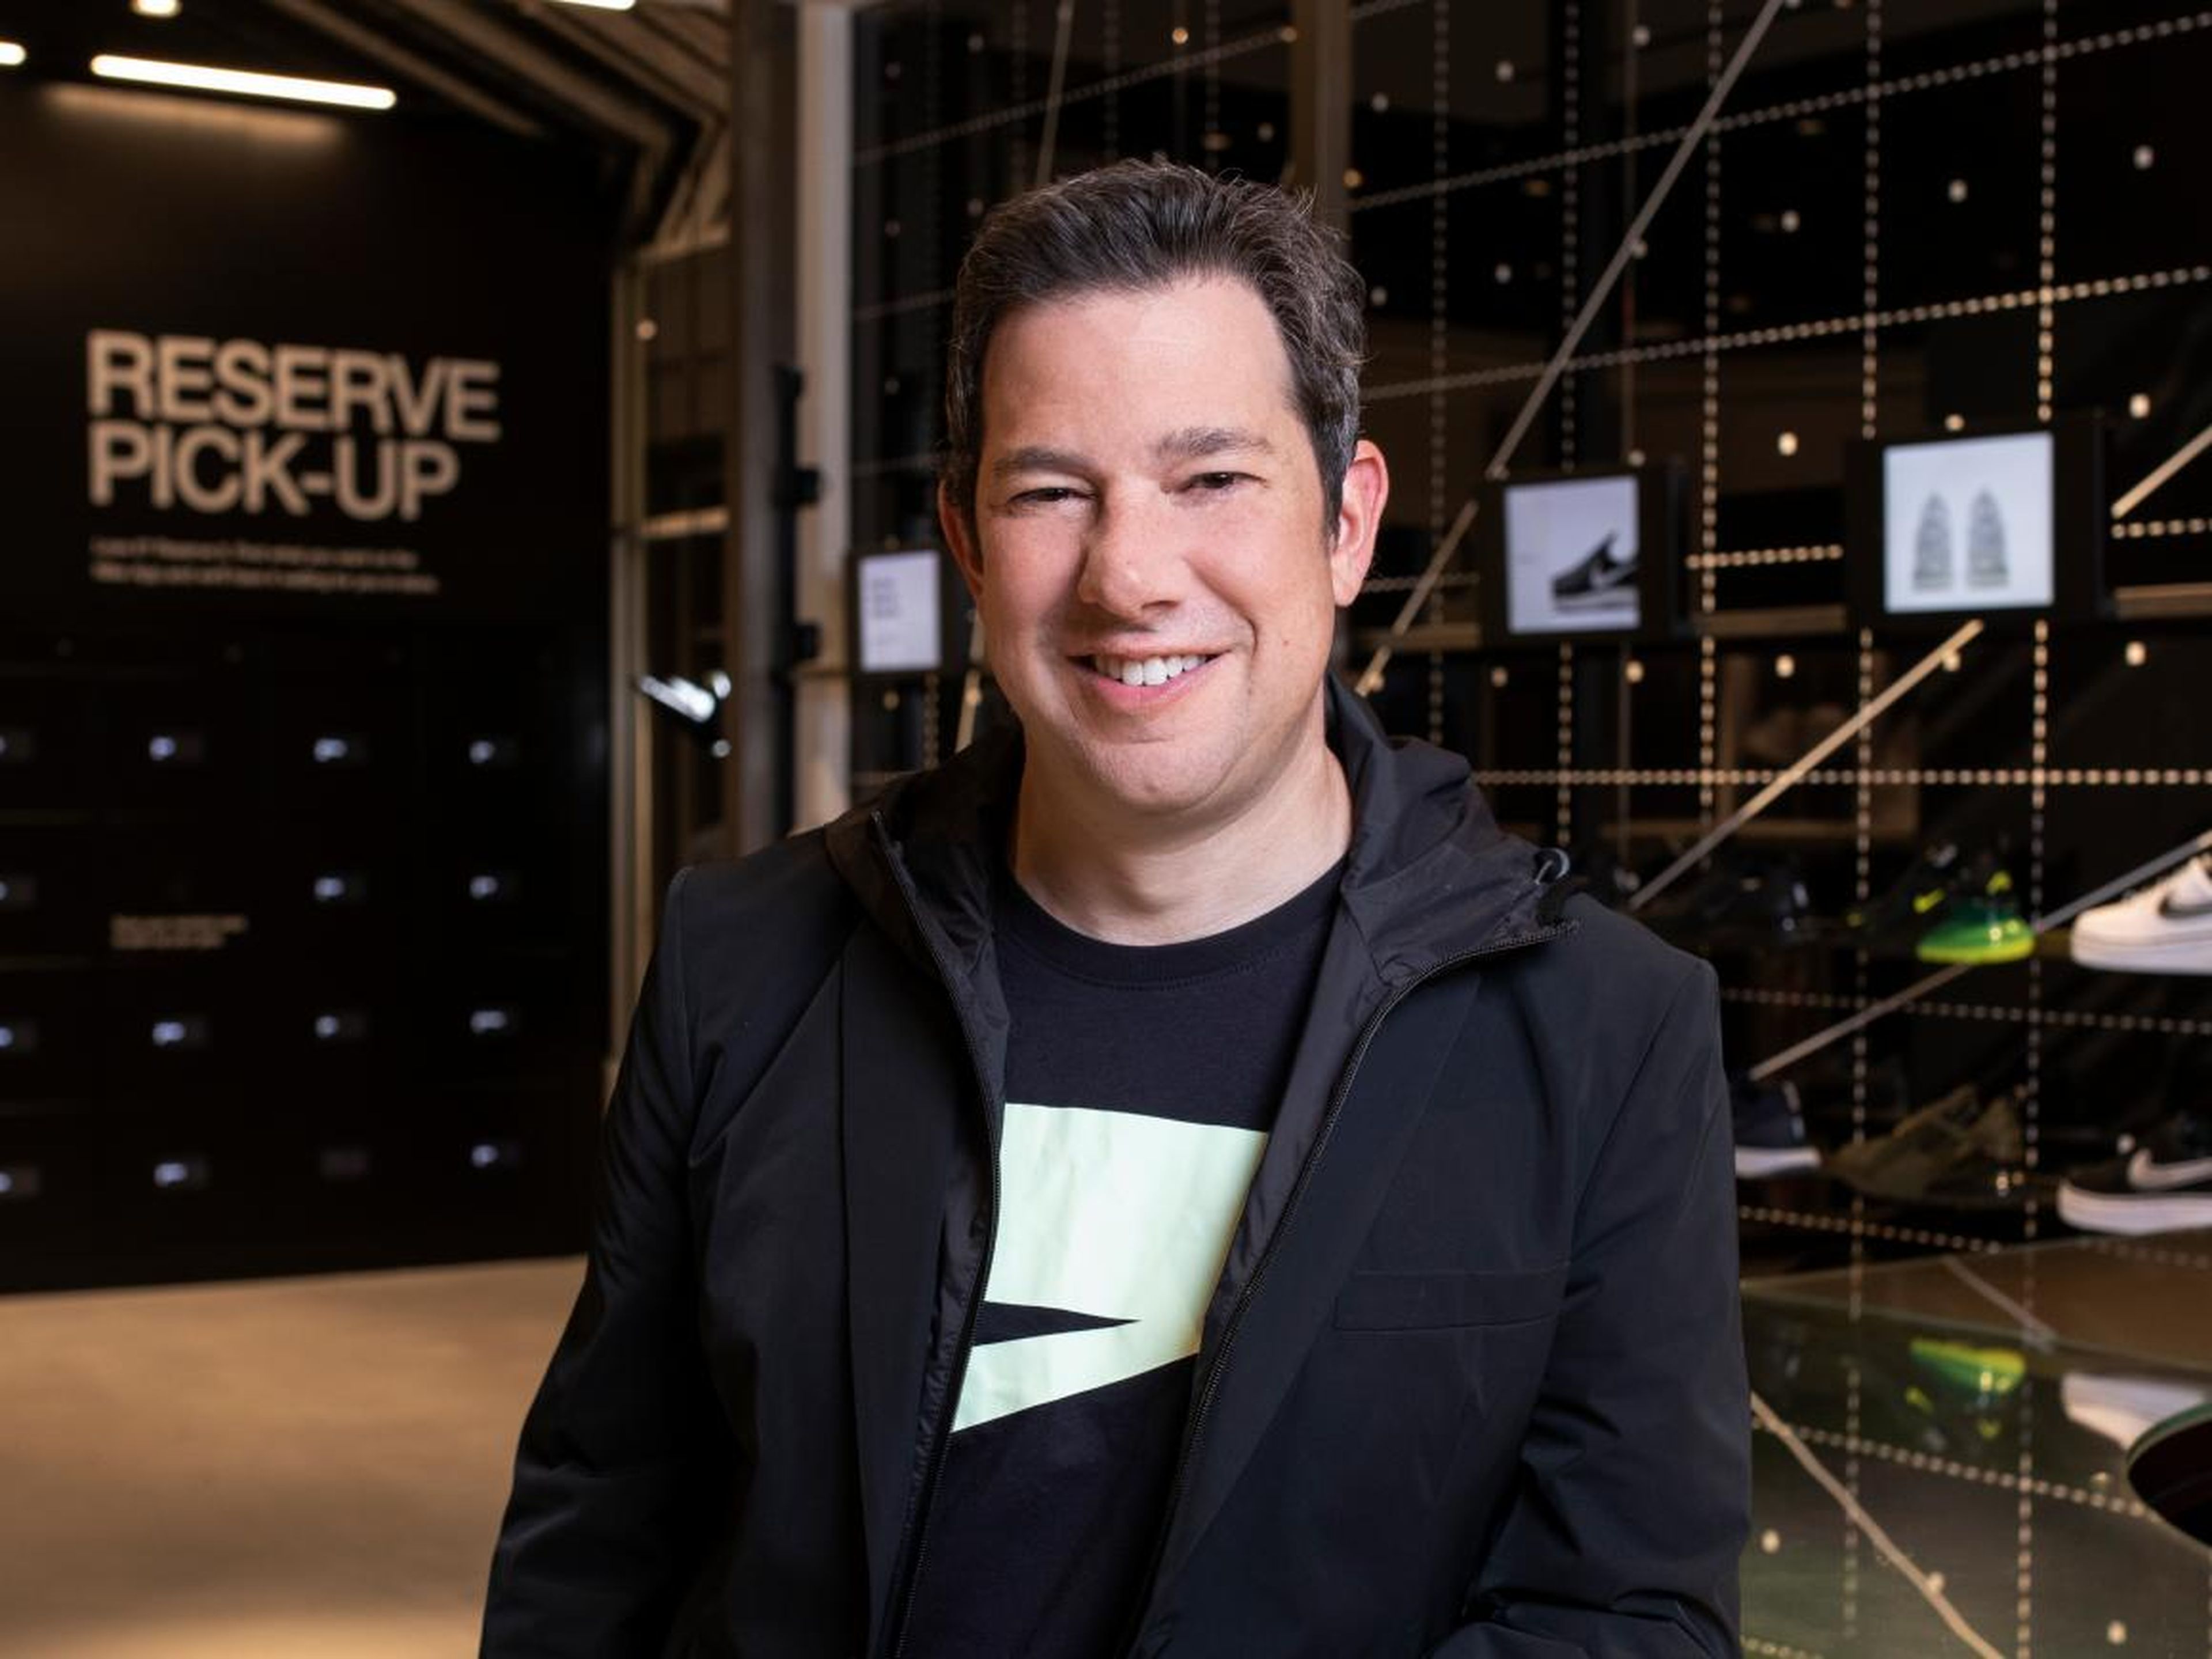 Adam Sussman, the vice president and general manager of Nike Direct digital and geographies, is leading a fundamental shift at the sports retailer